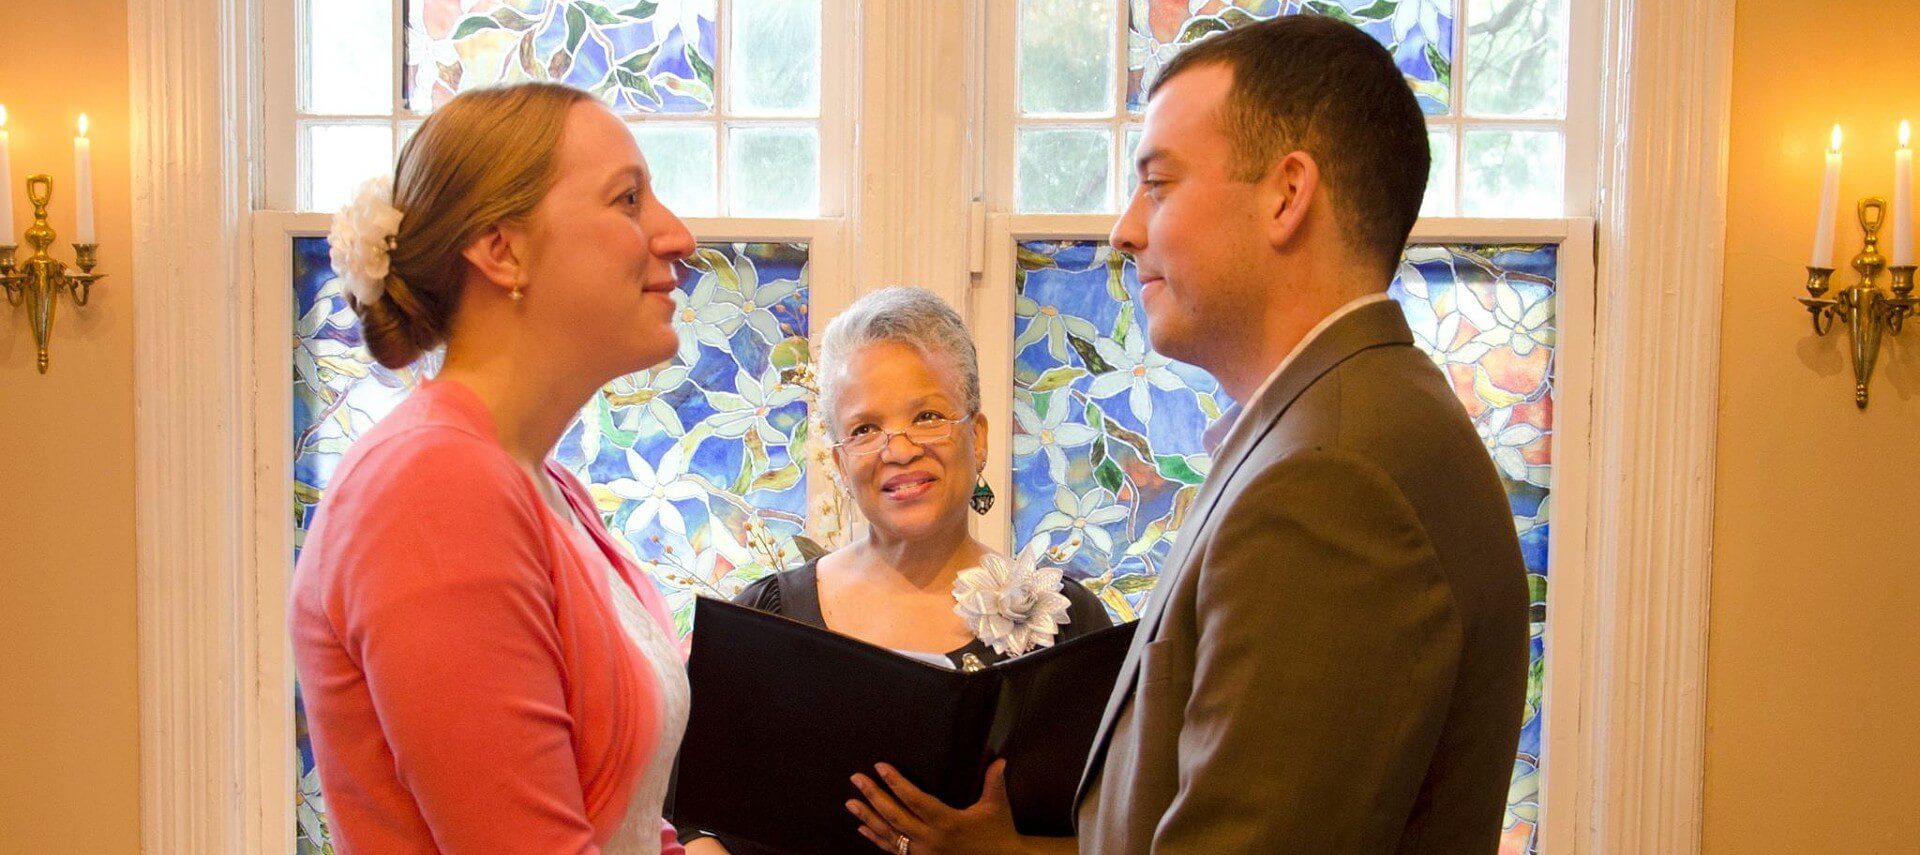 A bride and groom standing in front of a woman officiating their wedding in a room with stained glass windows